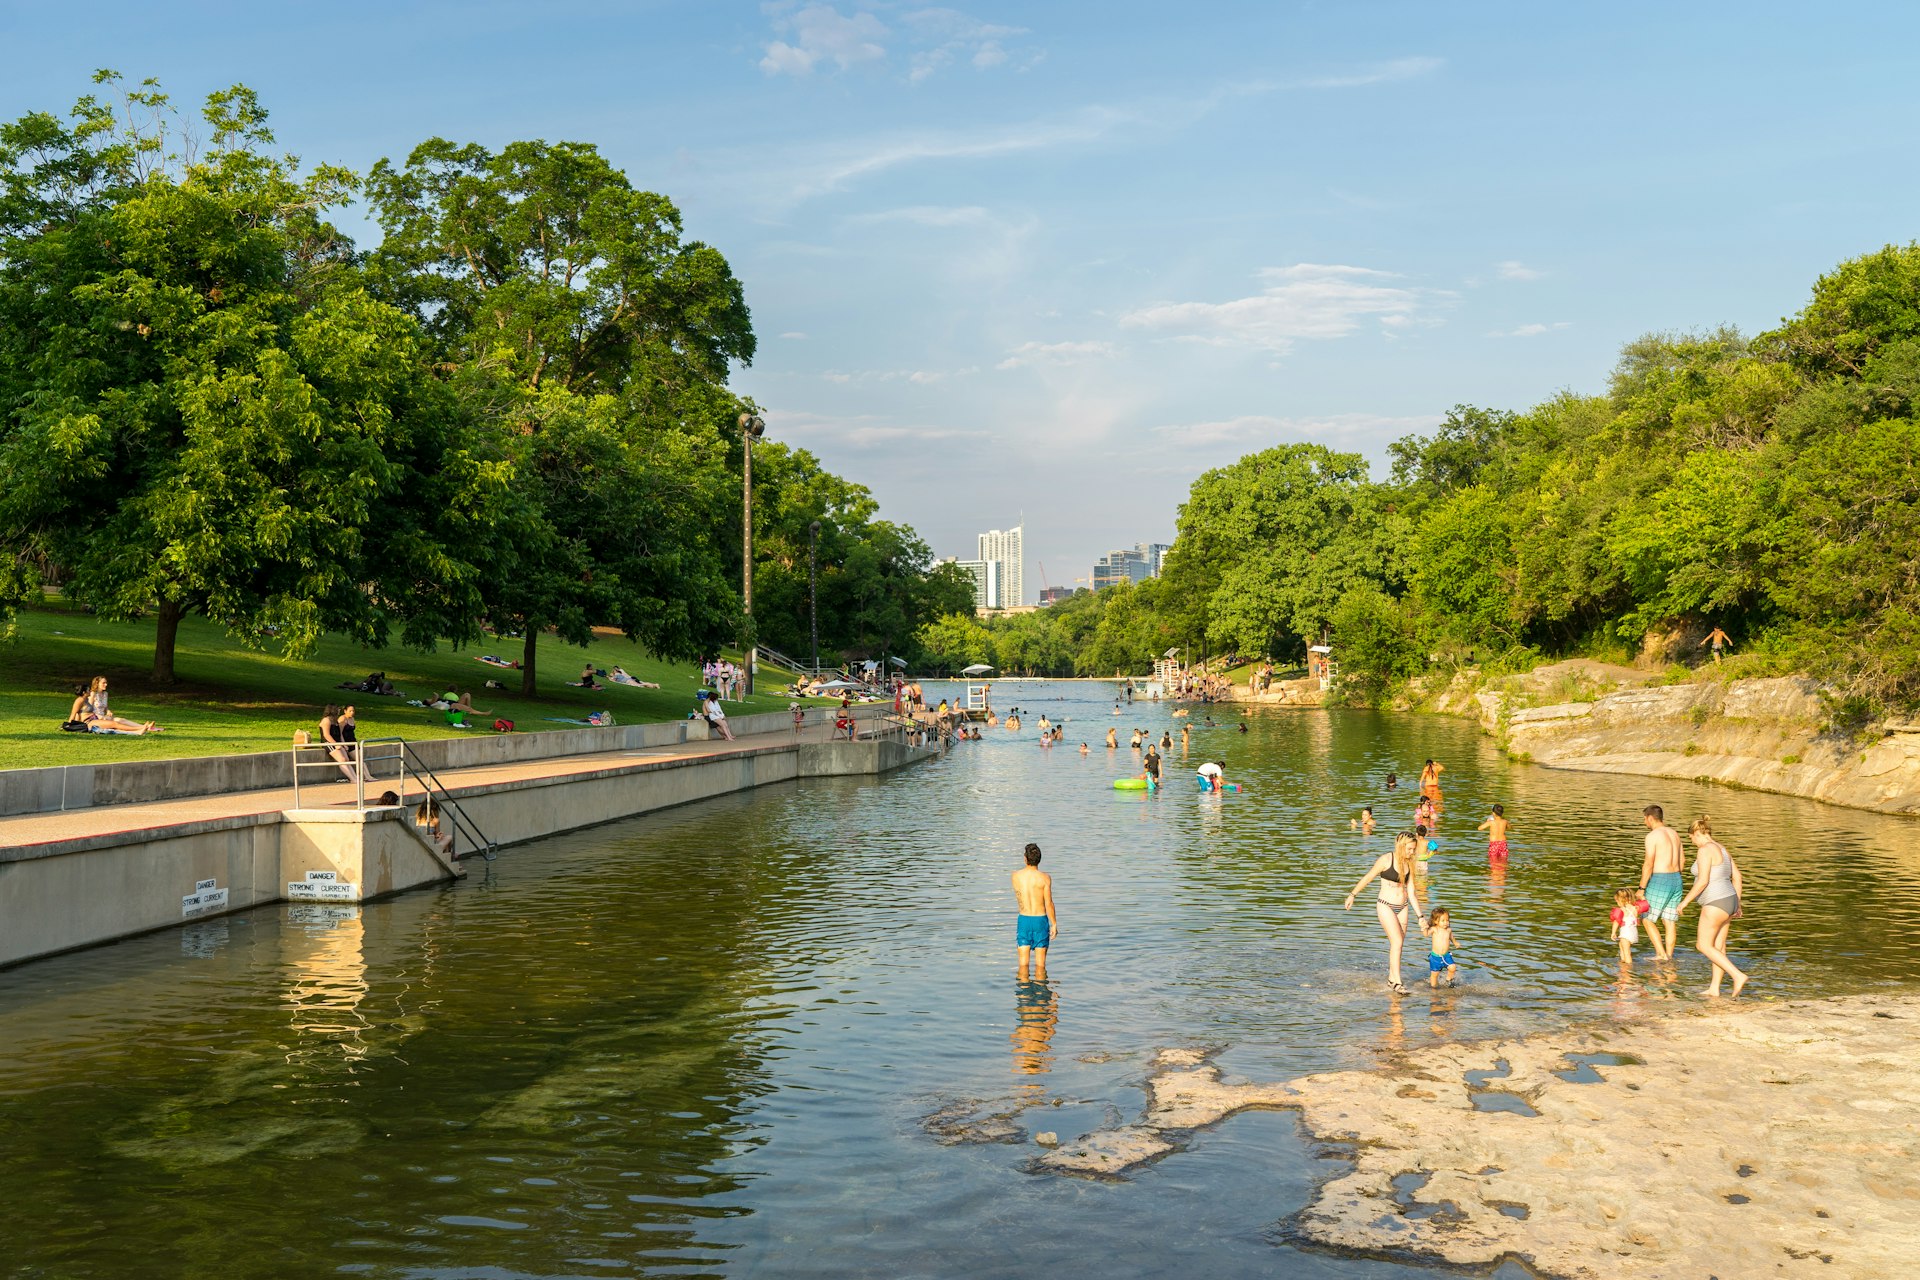 Swimmers at the Barton Springs pool in Austin